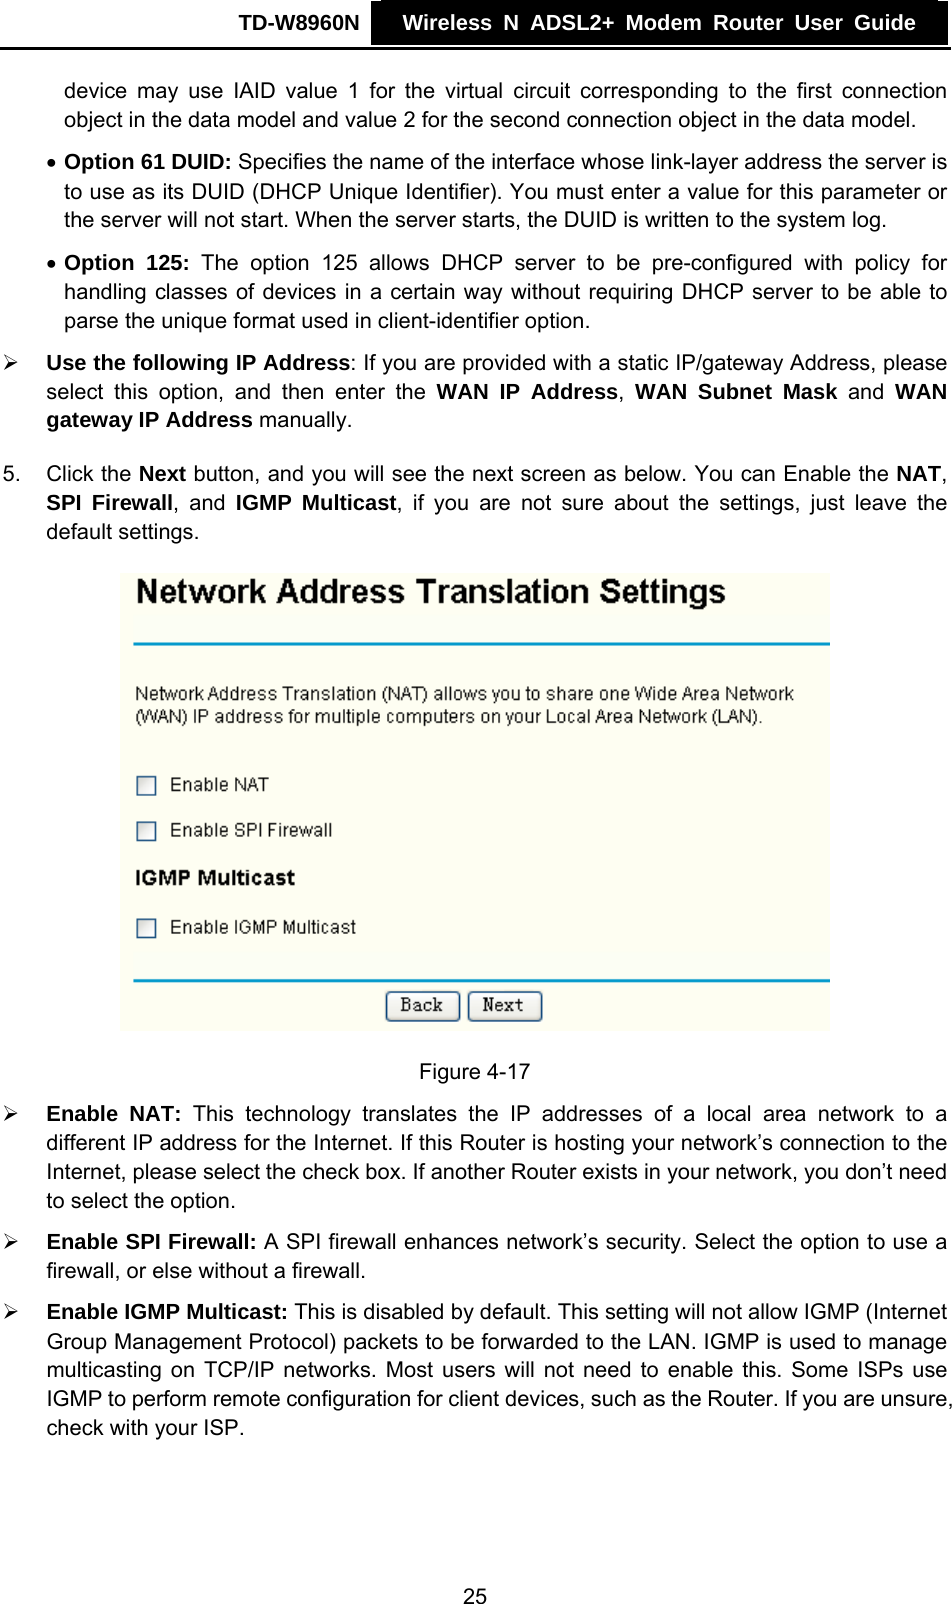 TD-W8960N    Wireless N ADSL2+ Modem Router User Guide    device may use IAID value 1 for the virtual circuit corresponding to the first connection object in the data model and value 2 for the second connection object in the data model. • Option 61 DUID: Specifies the name of the interface whose link-layer address the server is to use as its DUID (DHCP Unique Identifier). You must enter a value for this parameter or the server will not start. When the server starts, the DUID is written to the system log. • Option 125: The option 125 allows DHCP server to be pre-configured with policy for handling classes of devices in a certain way without requiring DHCP server to be able to parse the unique format used in client-identifier option.   ¾ Use the following IP Address: If you are provided with a static IP/gateway Address, please select this option, and then enter the WAN IP Address,  WAN Subnet Mask and WAN gateway IP Address manually. 5. Click the Next button, and you will see the next screen as below. You can Enable the NAT, SPI Firewall, and IGMP Multicast, if you are not sure about the settings, just leave the default settings.   Figure 4-17 ¾ Enable NAT: This technology translates the IP addresses of a local area network to a different IP address for the Internet. If this Router is hosting your network’s connection to the Internet, please select the check box. If another Router exists in your network, you don’t need to select the option. ¾ Enable SPI Firewall: A SPI firewall enhances network’s security. Select the option to use a firewall, or else without a firewall. ¾ Enable IGMP Multicast: This is disabled by default. This setting will not allow IGMP (Internet Group Management Protocol) packets to be forwarded to the LAN. IGMP is used to manage multicasting on TCP/IP networks. Most users will not need to enable this. Some ISPs use IGMP to perform remote configuration for client devices, such as the Router. If you are unsure, check with your ISP. 25 